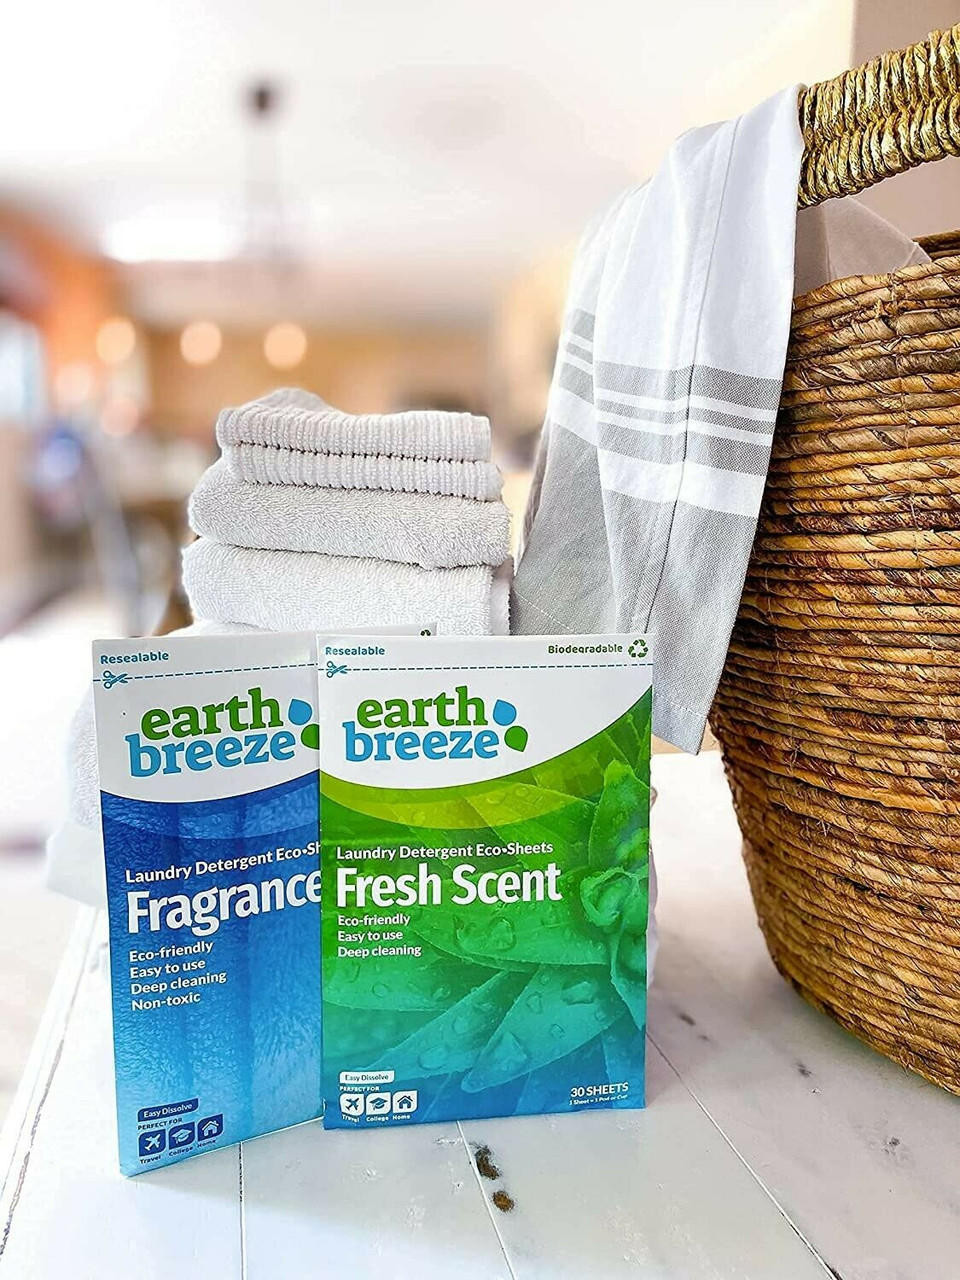 https://cdn11.bigcommerce.com/s-zrh8tkpr8d/images/stencil/1280x1280/products/9919/32269/earth-breeze-laundry-detergent-or-liquidless-fresh-scent-or-30-sheets-60-loads__57943.1665666738.jpg?c=2